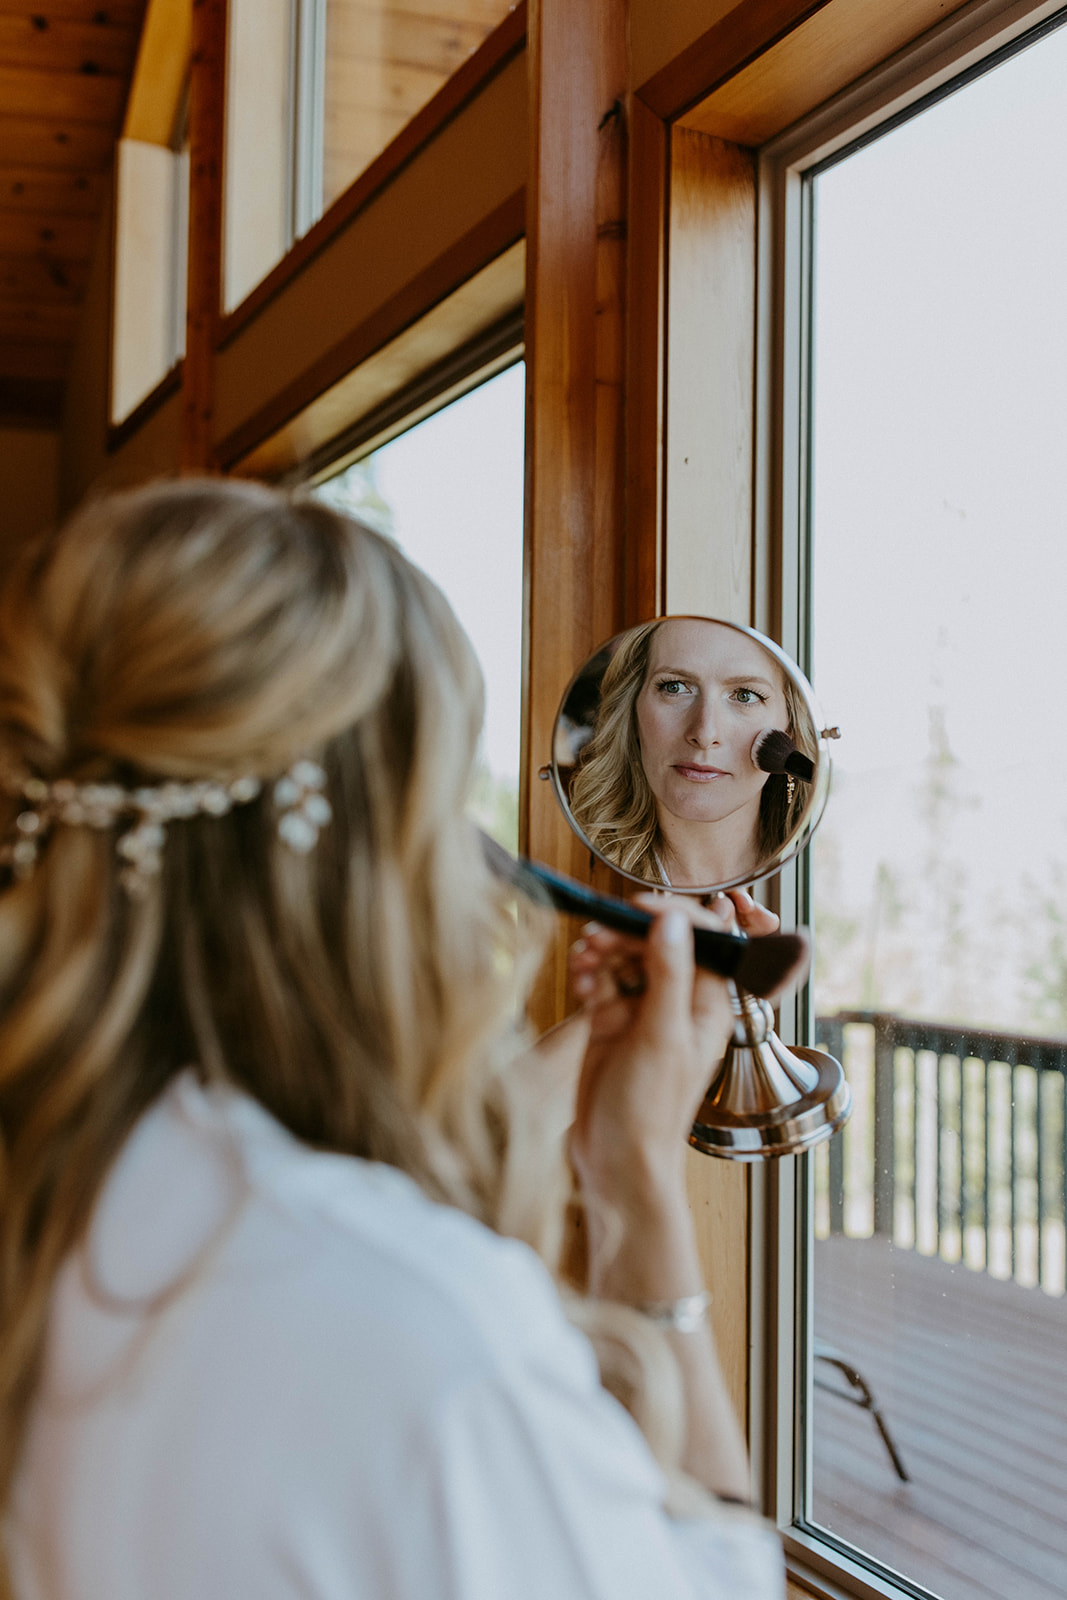 northern california wedding photographer captures bride getting ready for her intimate fall wedding